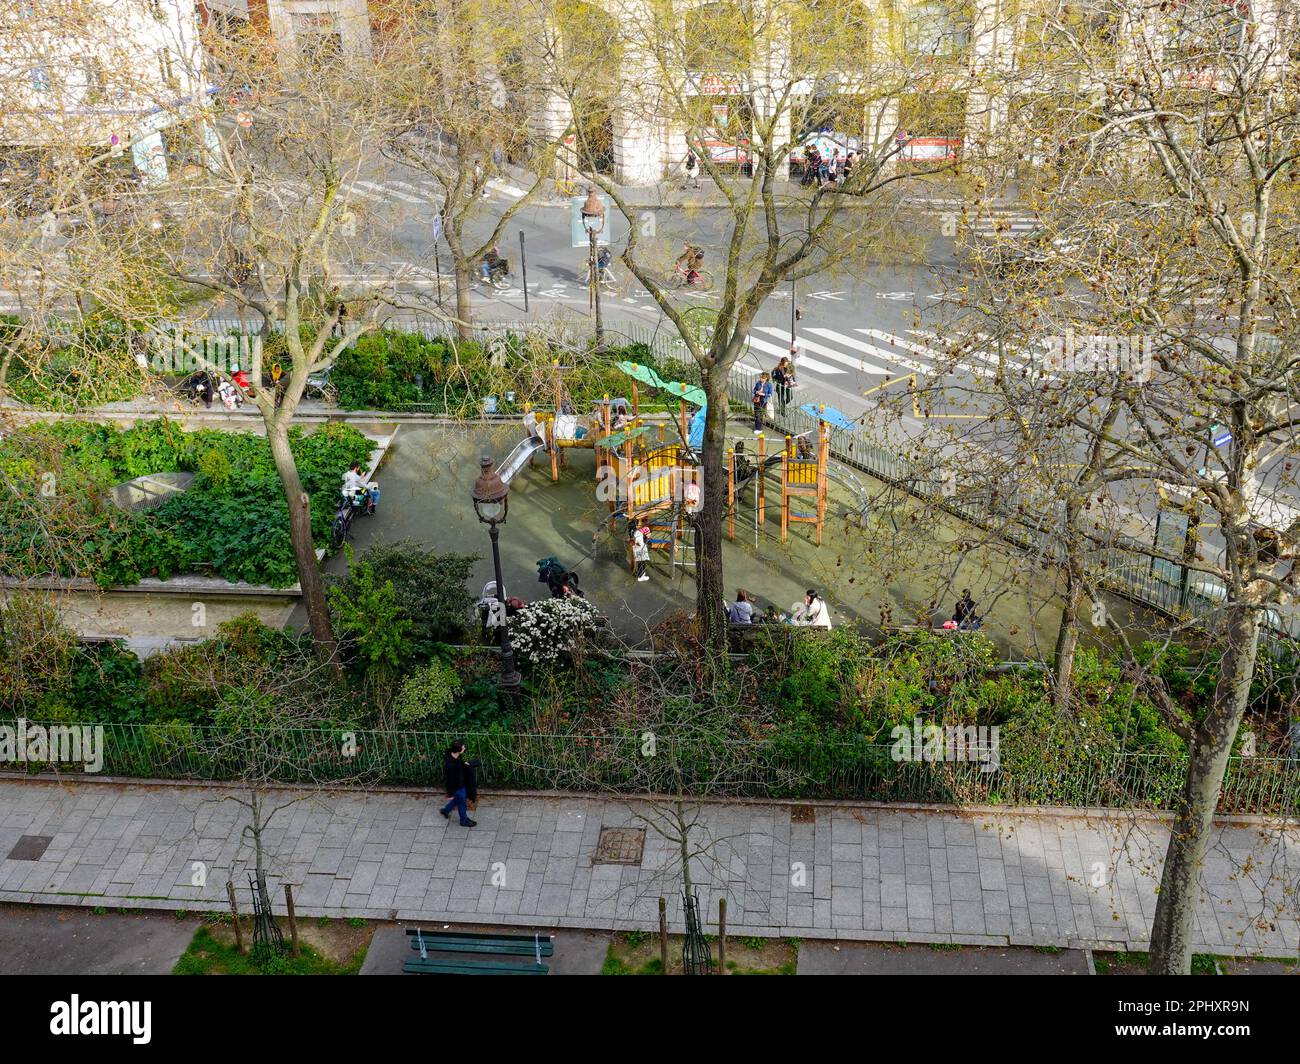 Children being watched by parents, carers, as they play on a city playground. Every day life on Bd Richard-Lenoir, Paris, France. Stock Photo